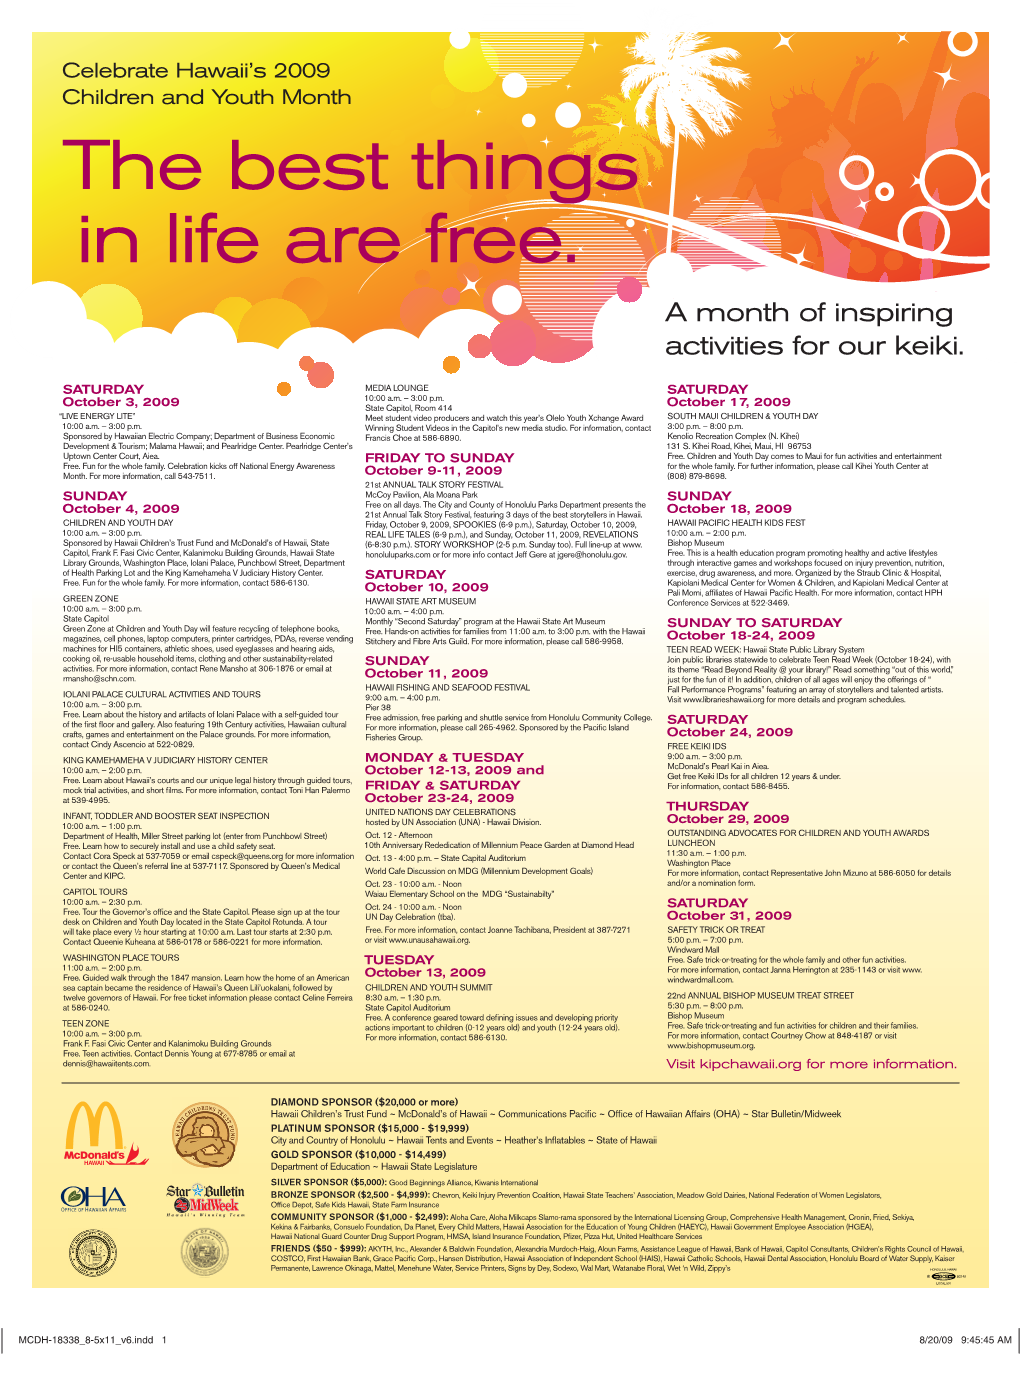 The Best Things in Life Are Free. a Month of Inspiring Activities for Our Keiki